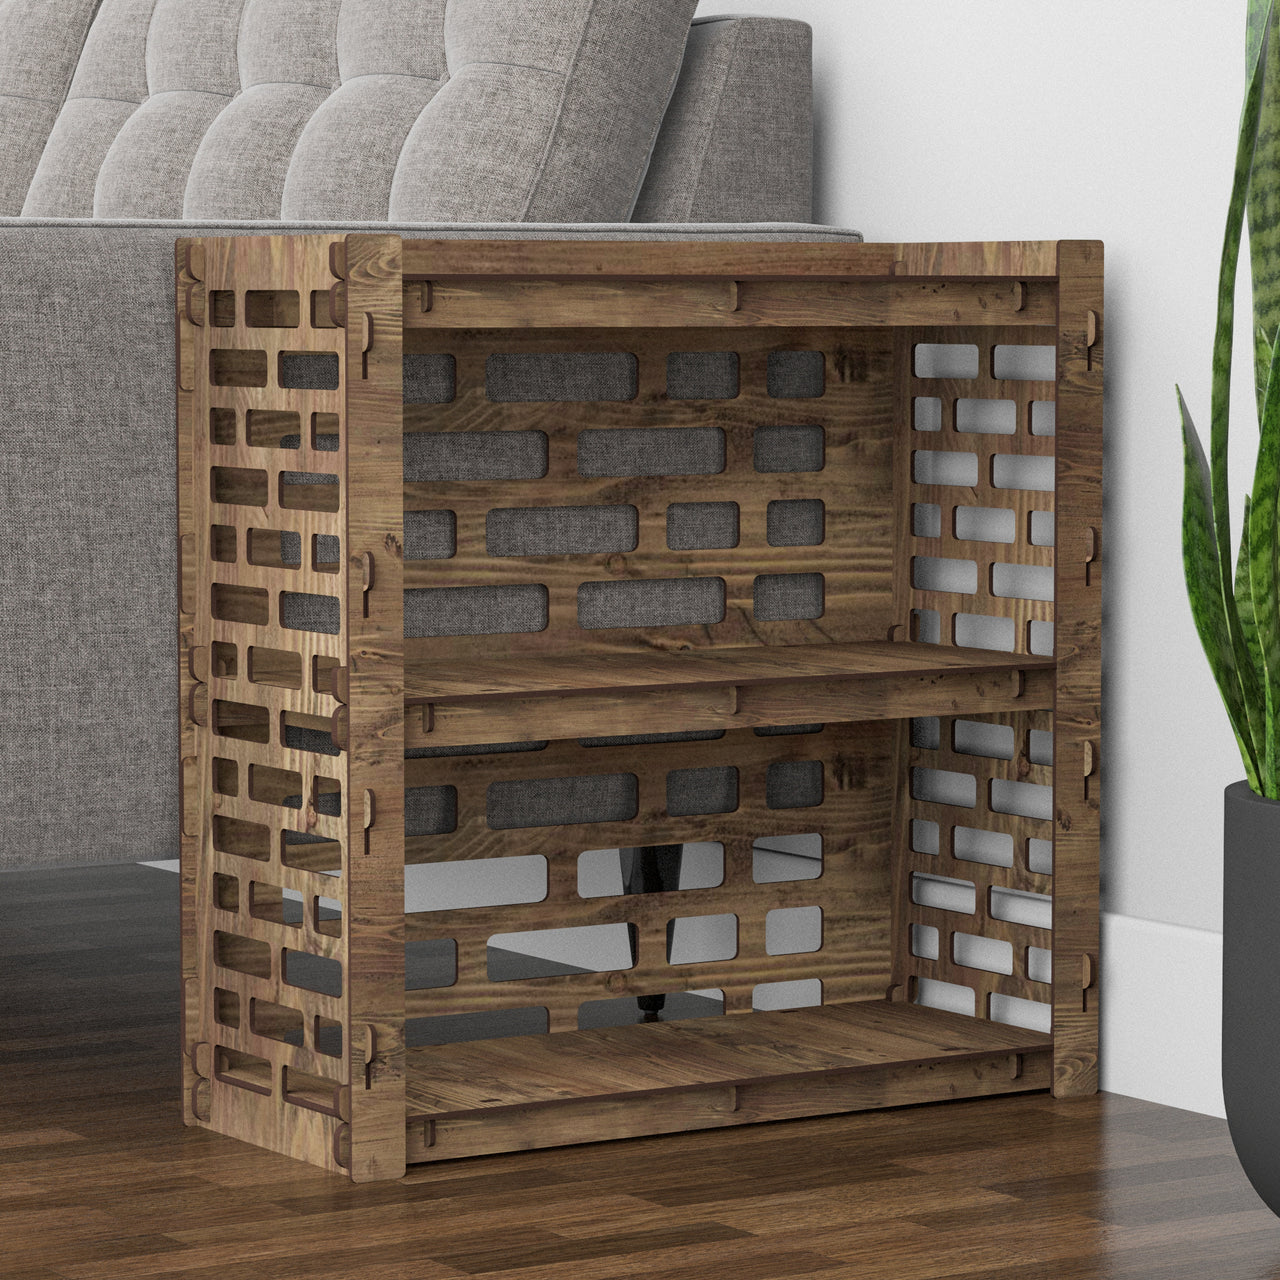 Brickwall Side Table, End Table 3 Drawers [1L 2S BLACK BINS]